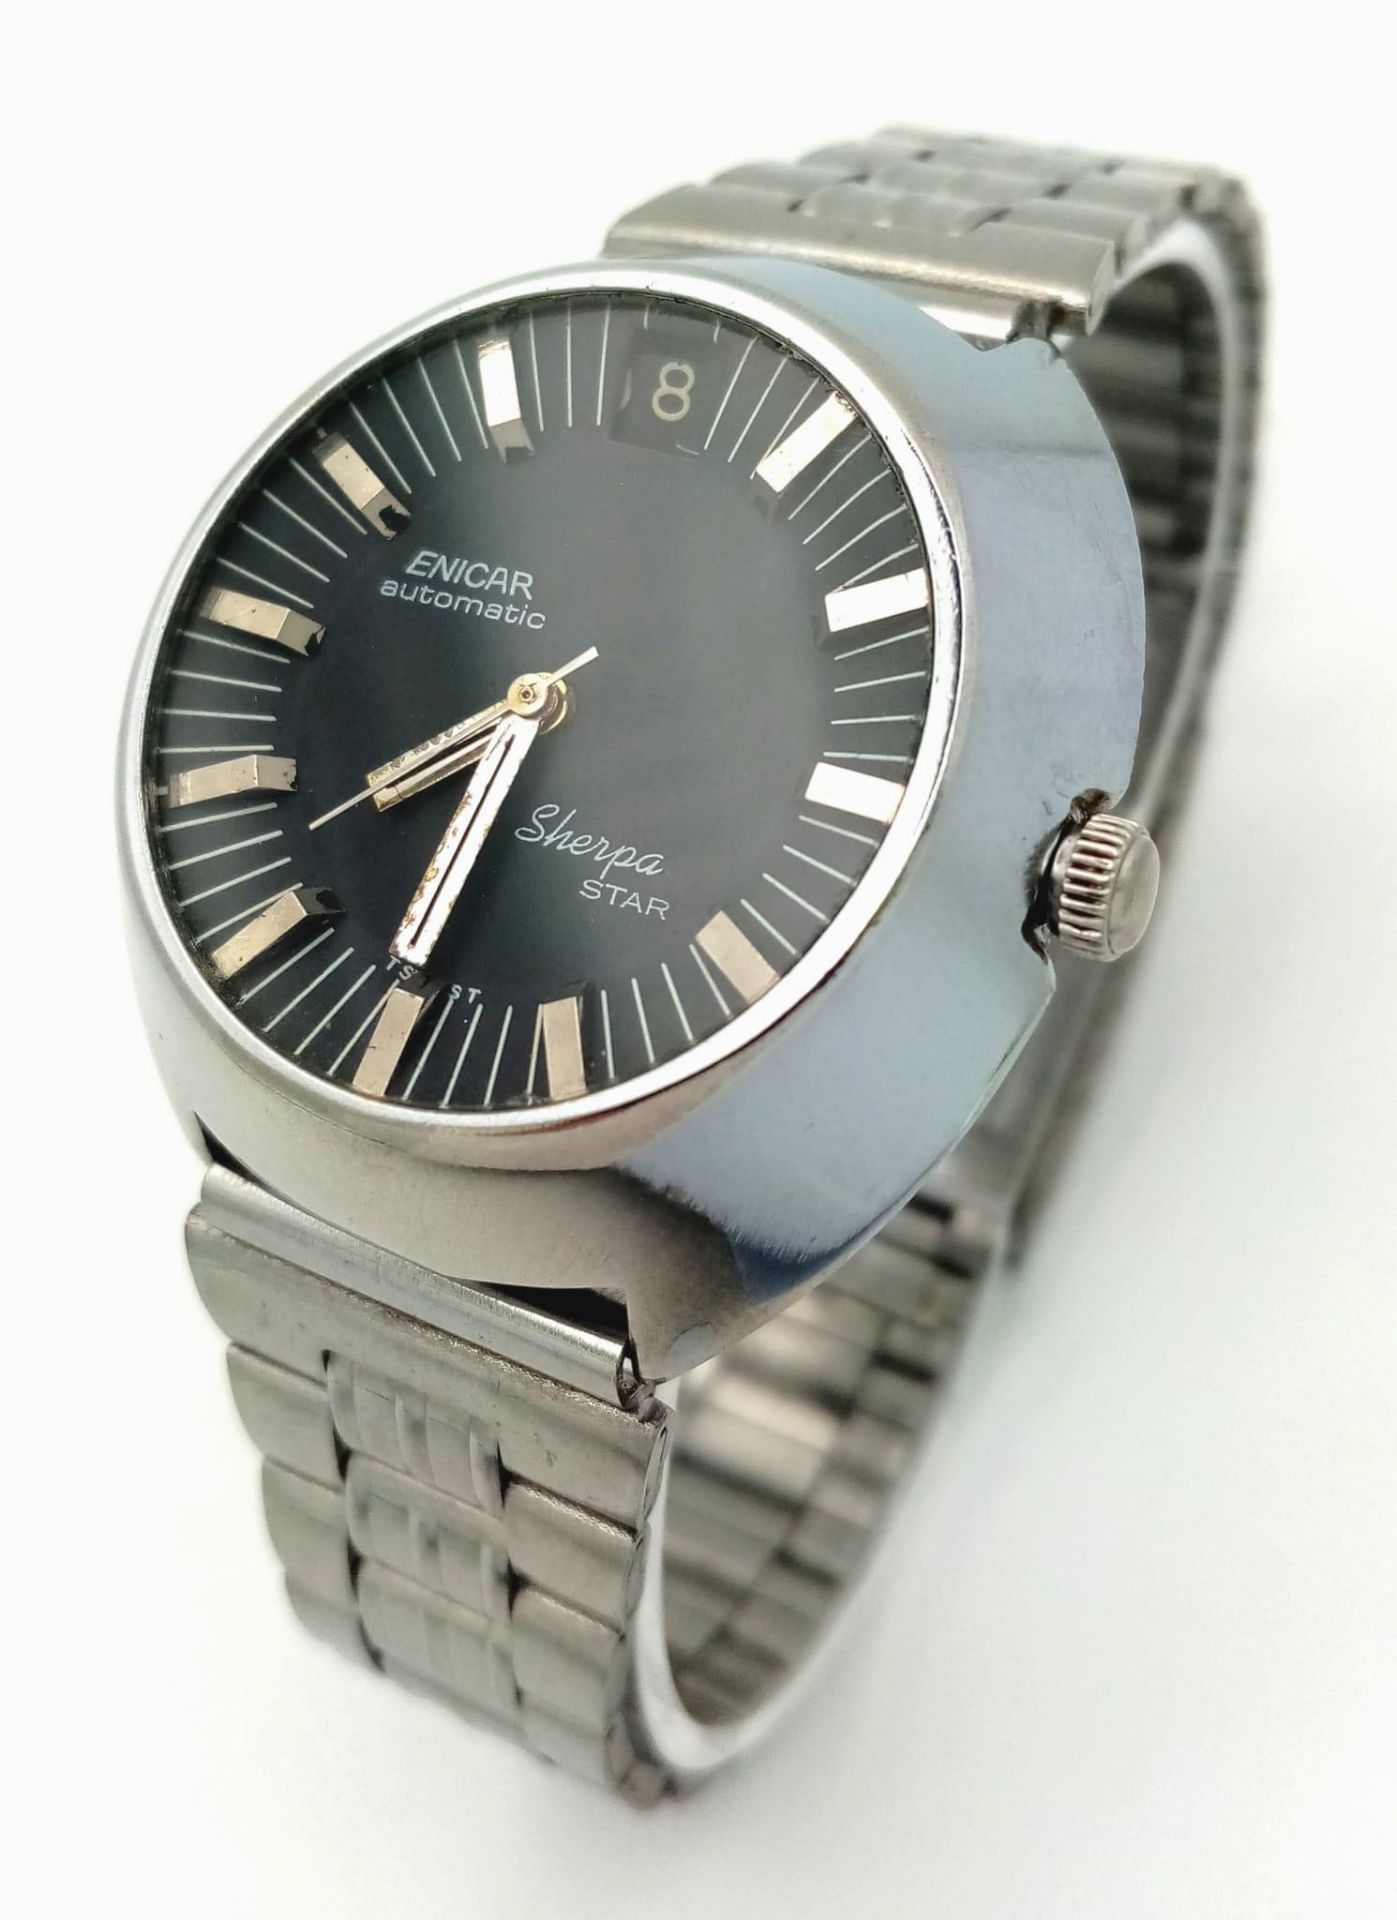 A Very Rare Enicar Sherpa Automatic Gents Watch. Stainless steel strap and case - 38mm. Black dial - Bild 3 aus 8